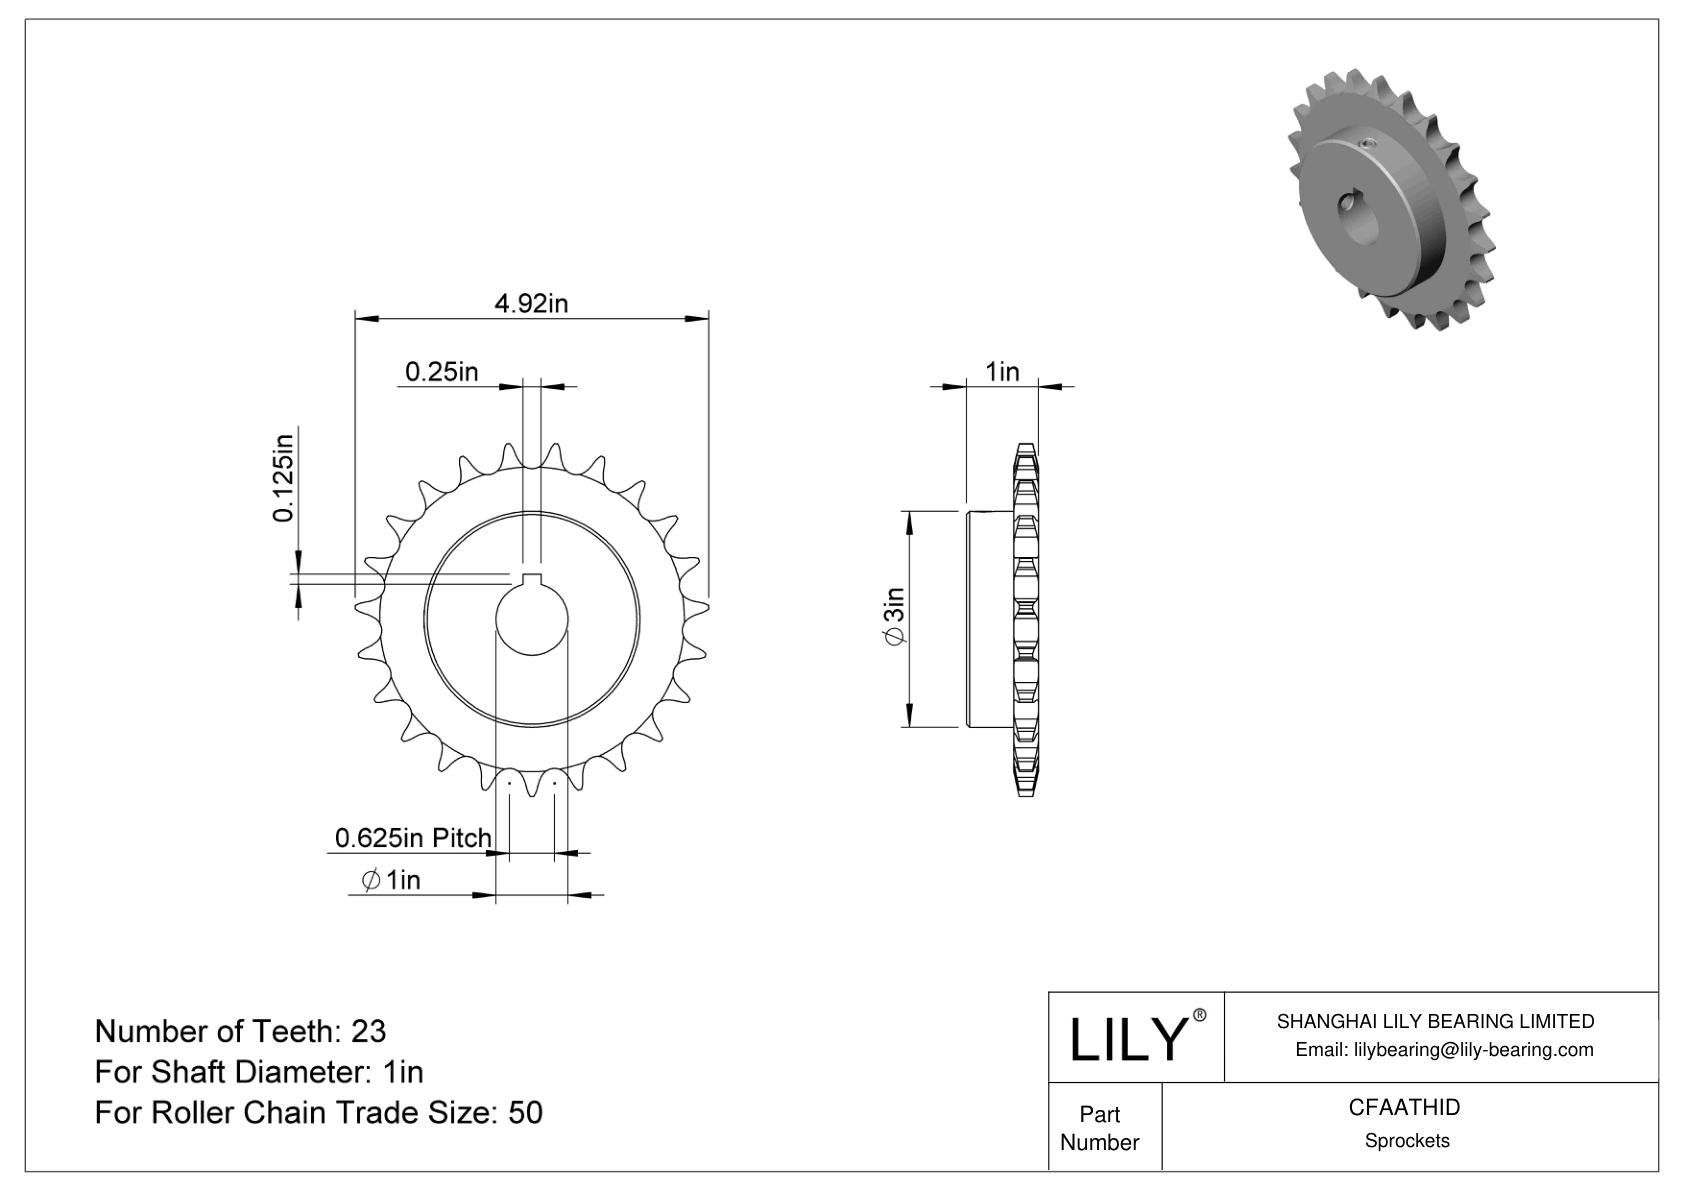 CFAATHID Wear-Resistant Sprockets for ANSI Roller Chain cad drawing